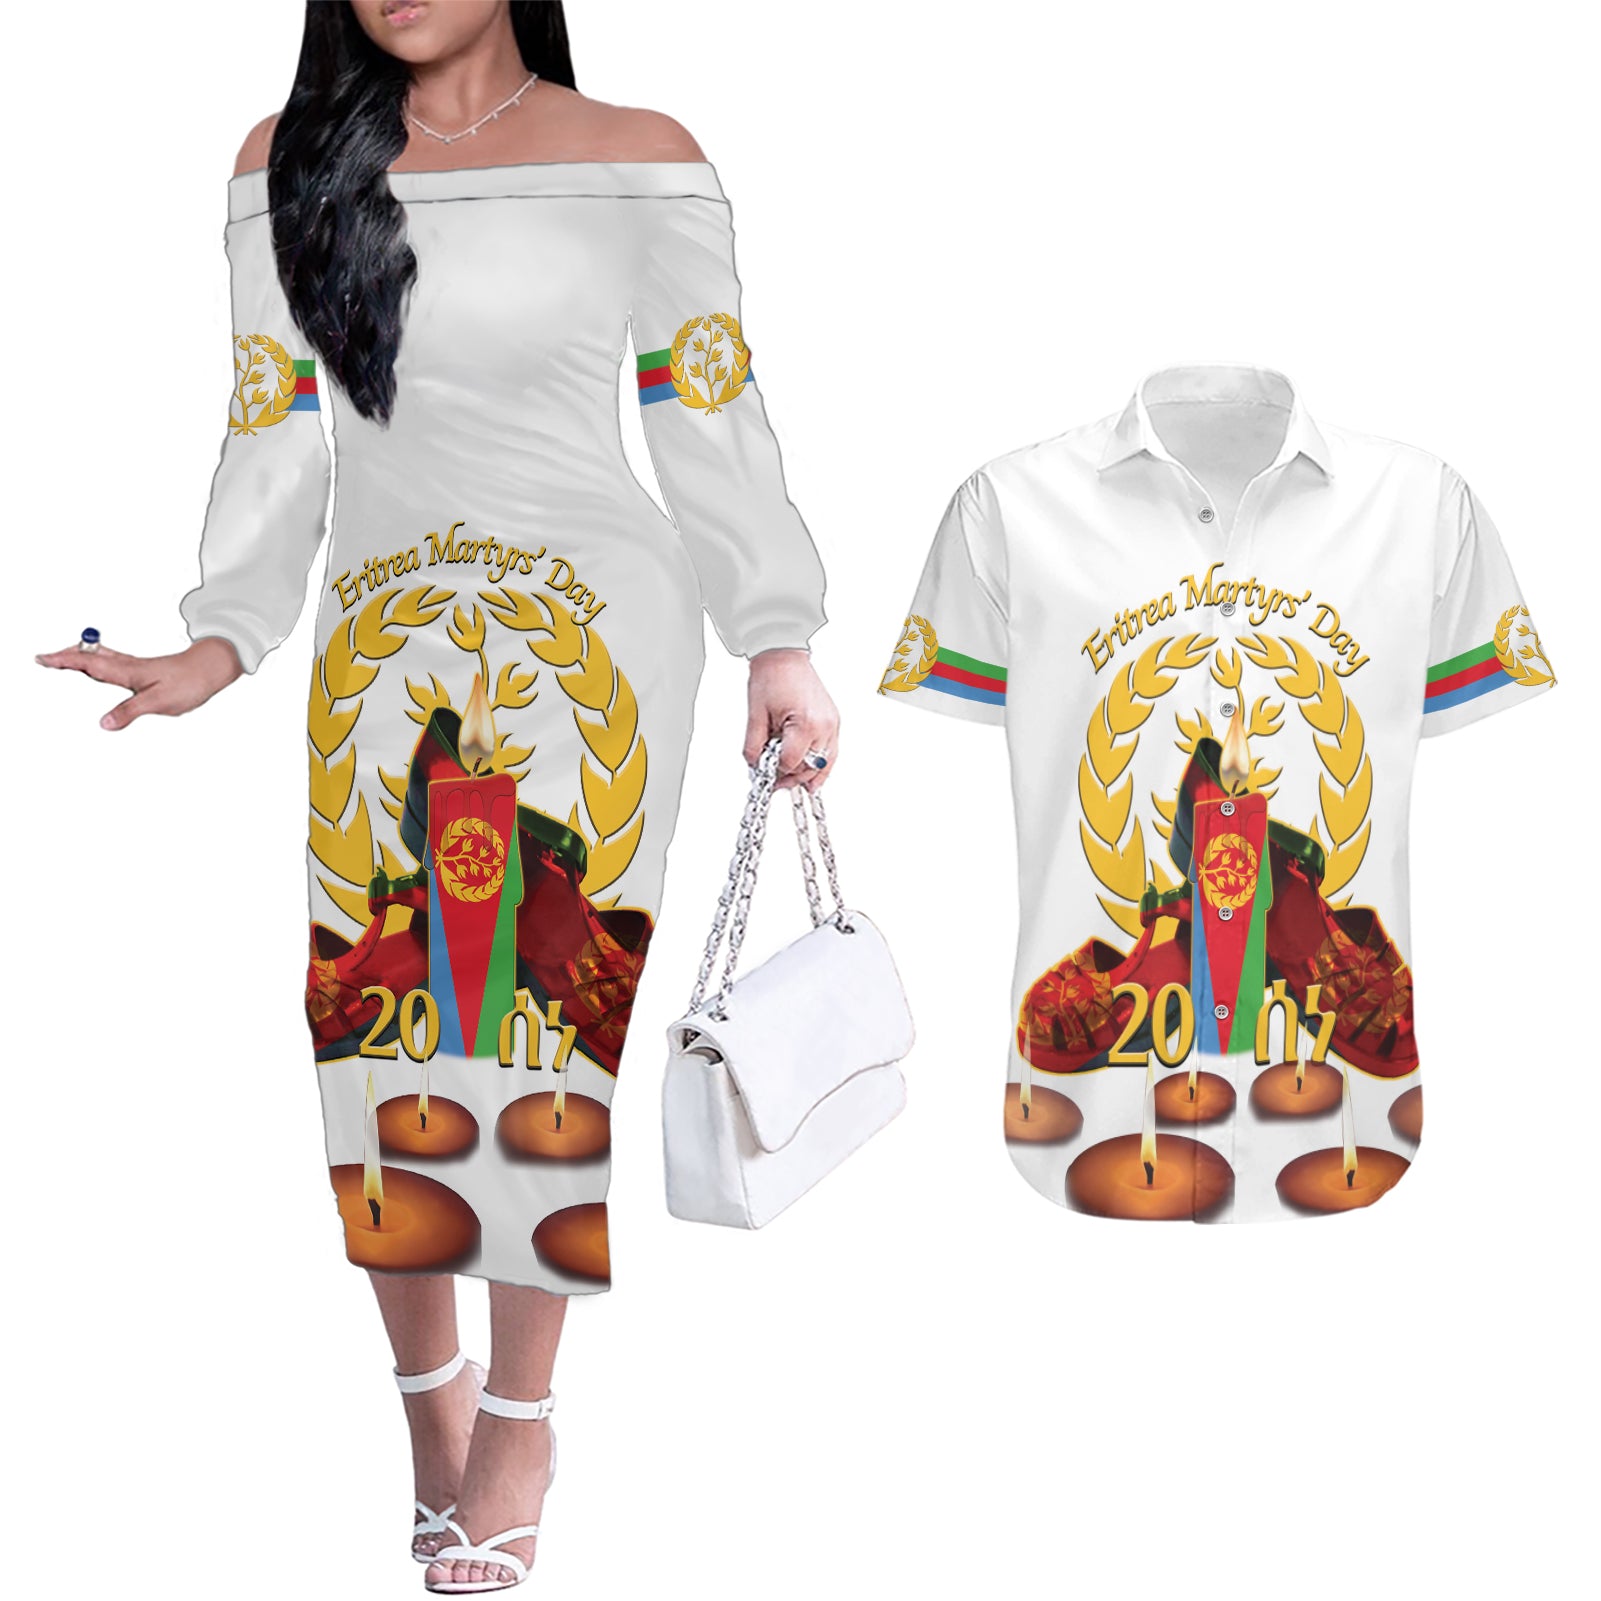 Custom Eritrea Martyrs' Day Couples Matching Off The Shoulder Long Sleeve Dress and Hawaiian Shirt 20 June Shida Shoes With Candles - White